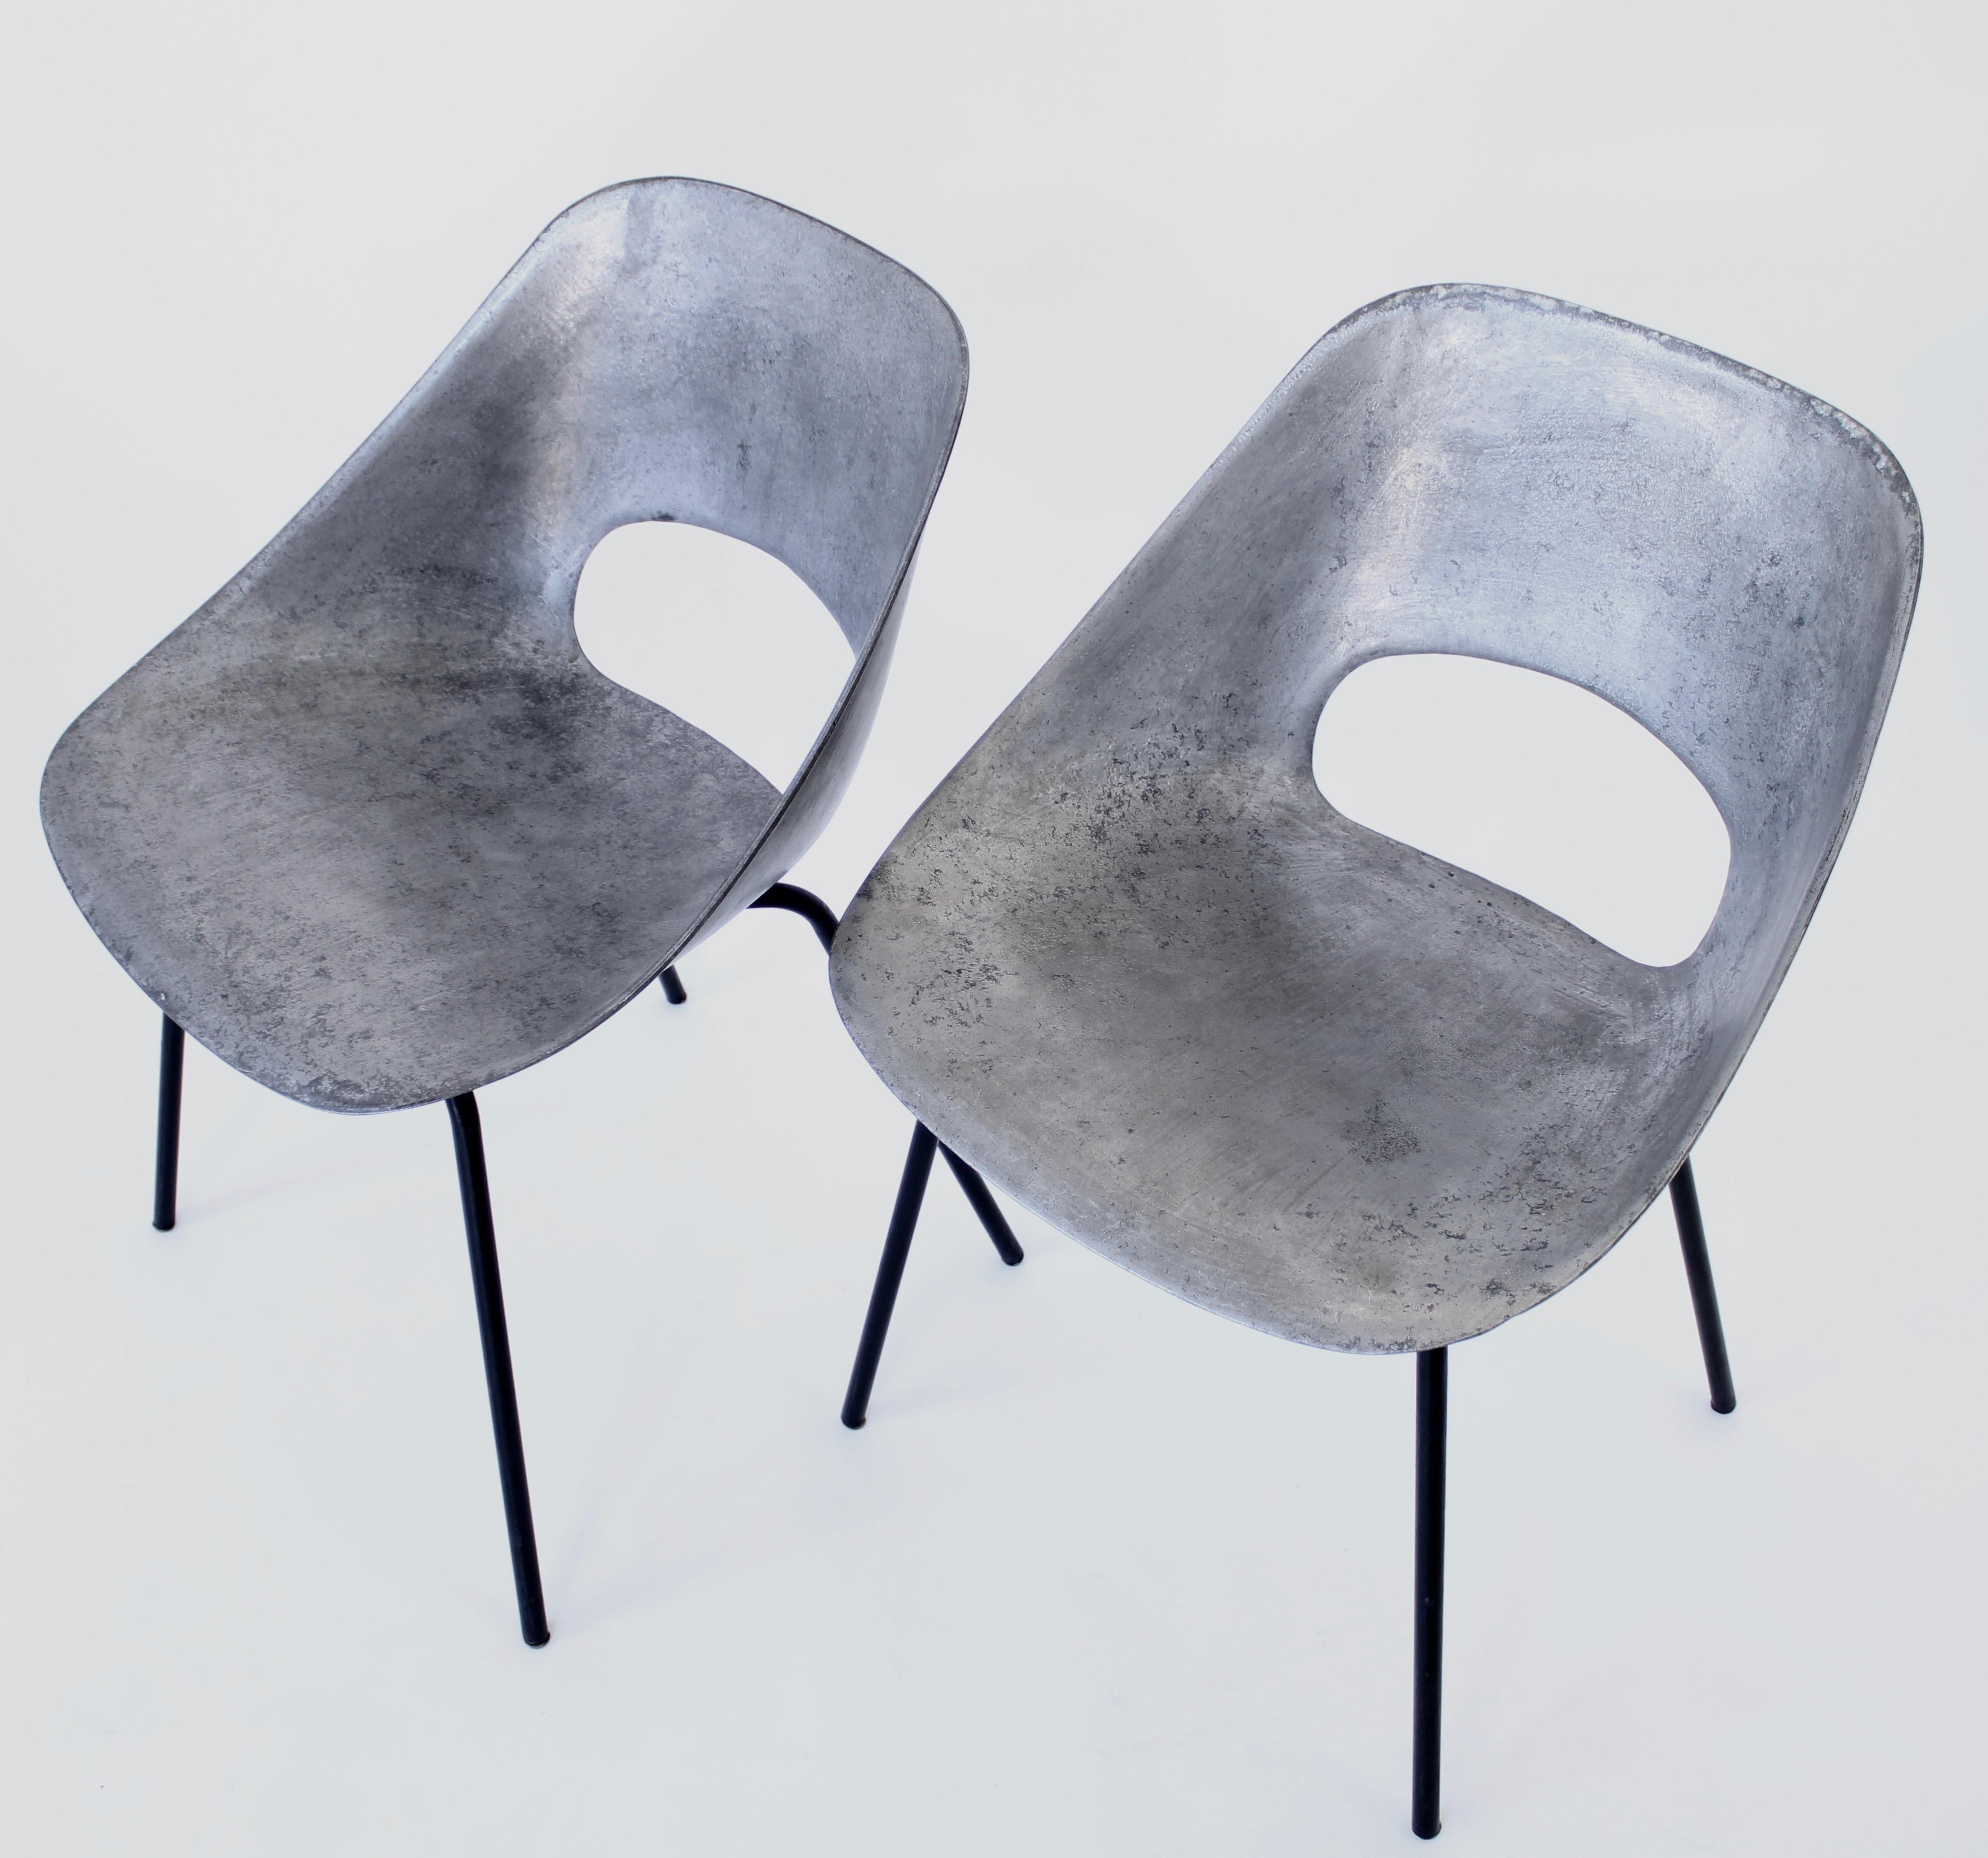 Mid-20th Century Pierre Guariche Cast Aluminum Pair of Tulip Chairs for Steiner France circa 1954